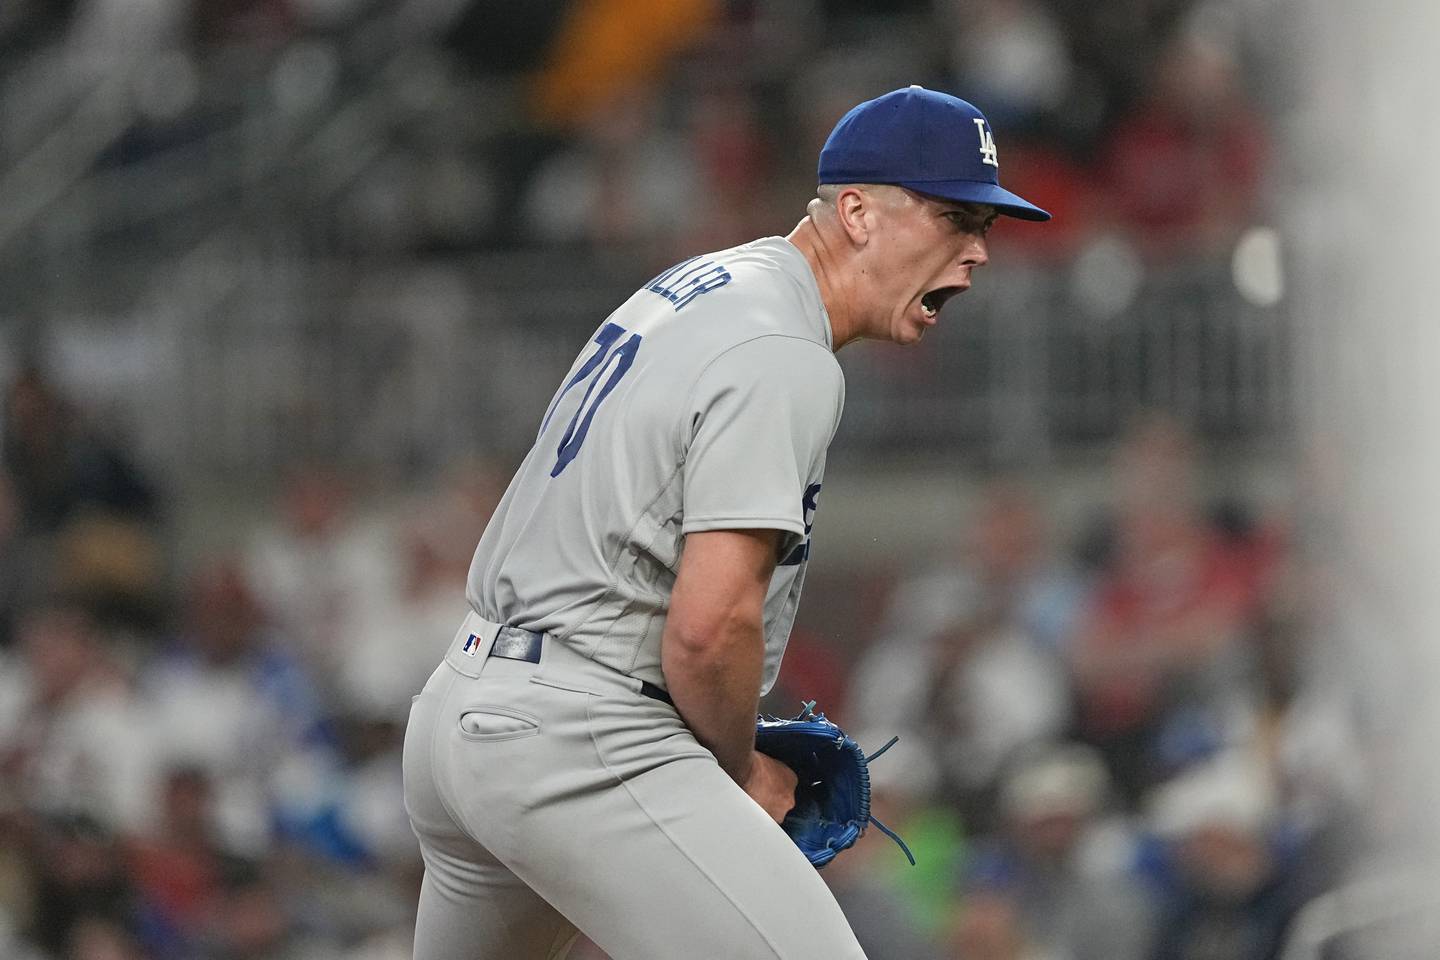 Los Angeles Dodgers rookie stating pitcher Bobby Miller reacts after recording the final out in the fifth inning against the Atlanta Braves, Tuesday, May 23, 2023, in Atlanta. The game was Miller's Major League debut.